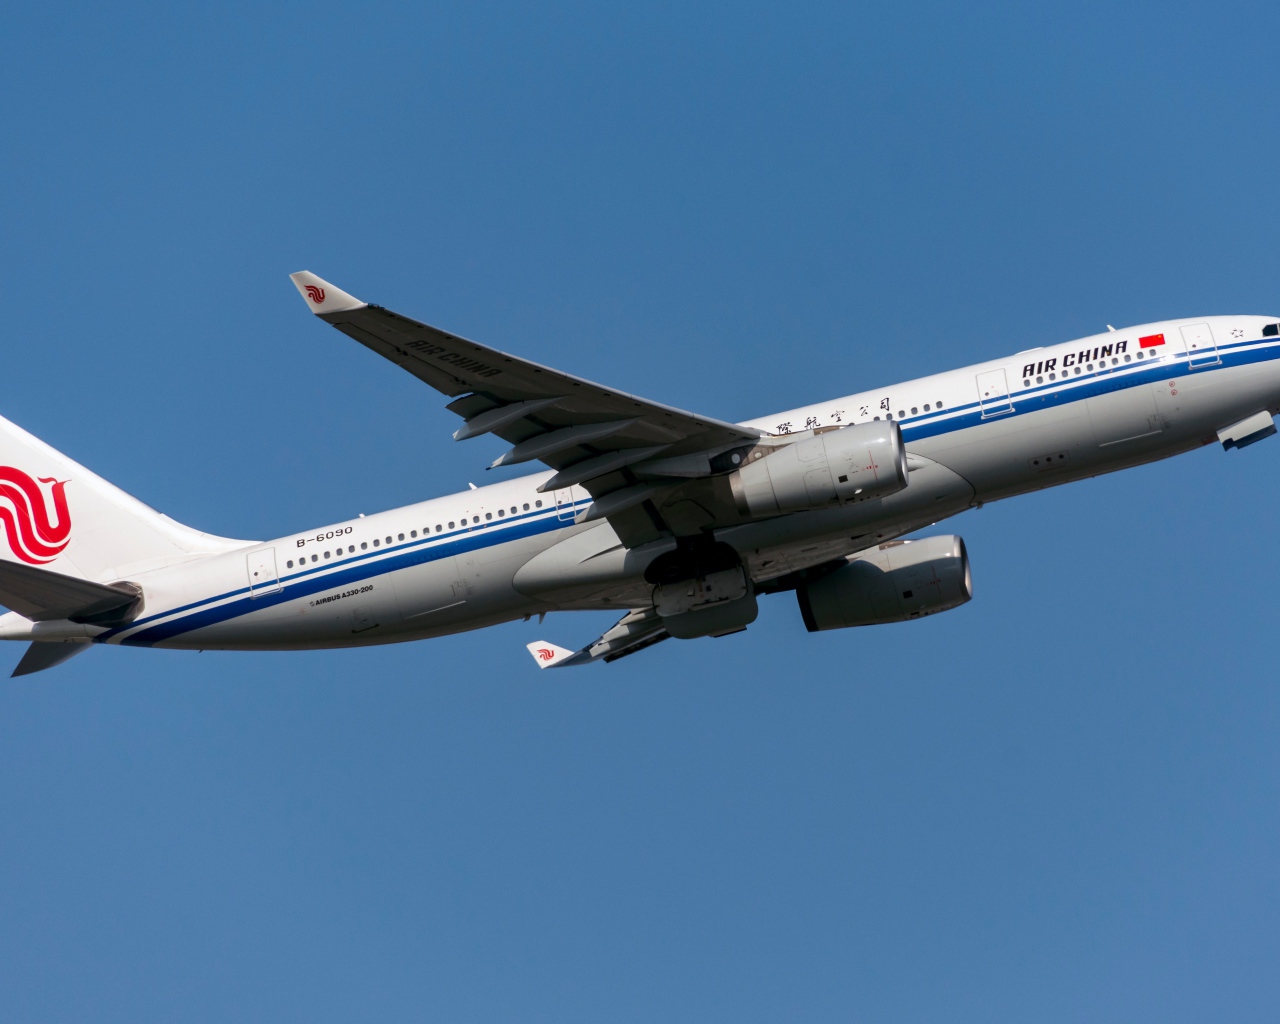 Passenger Airbus A330-200 Air China Airlines